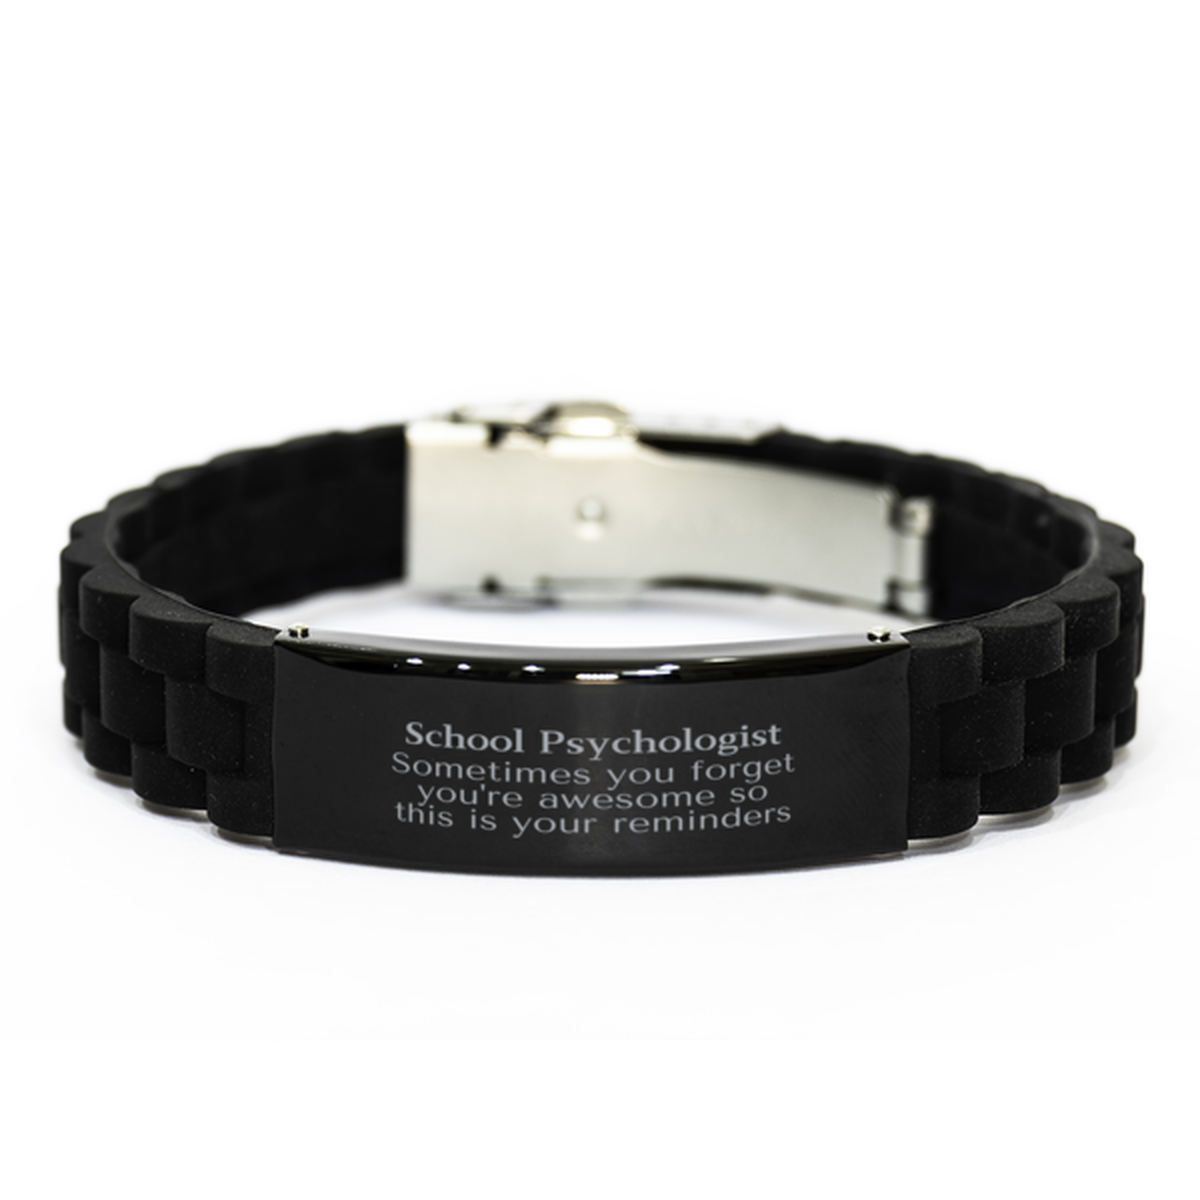 Sentimental School Psychologist Black Glidelock Clasp Bracelet, School Psychologist Sometimes you forget you're awesome so this is your reminders, Graduation Christmas Birthday Gifts for School Psychologist, Men, Women, Coworkers